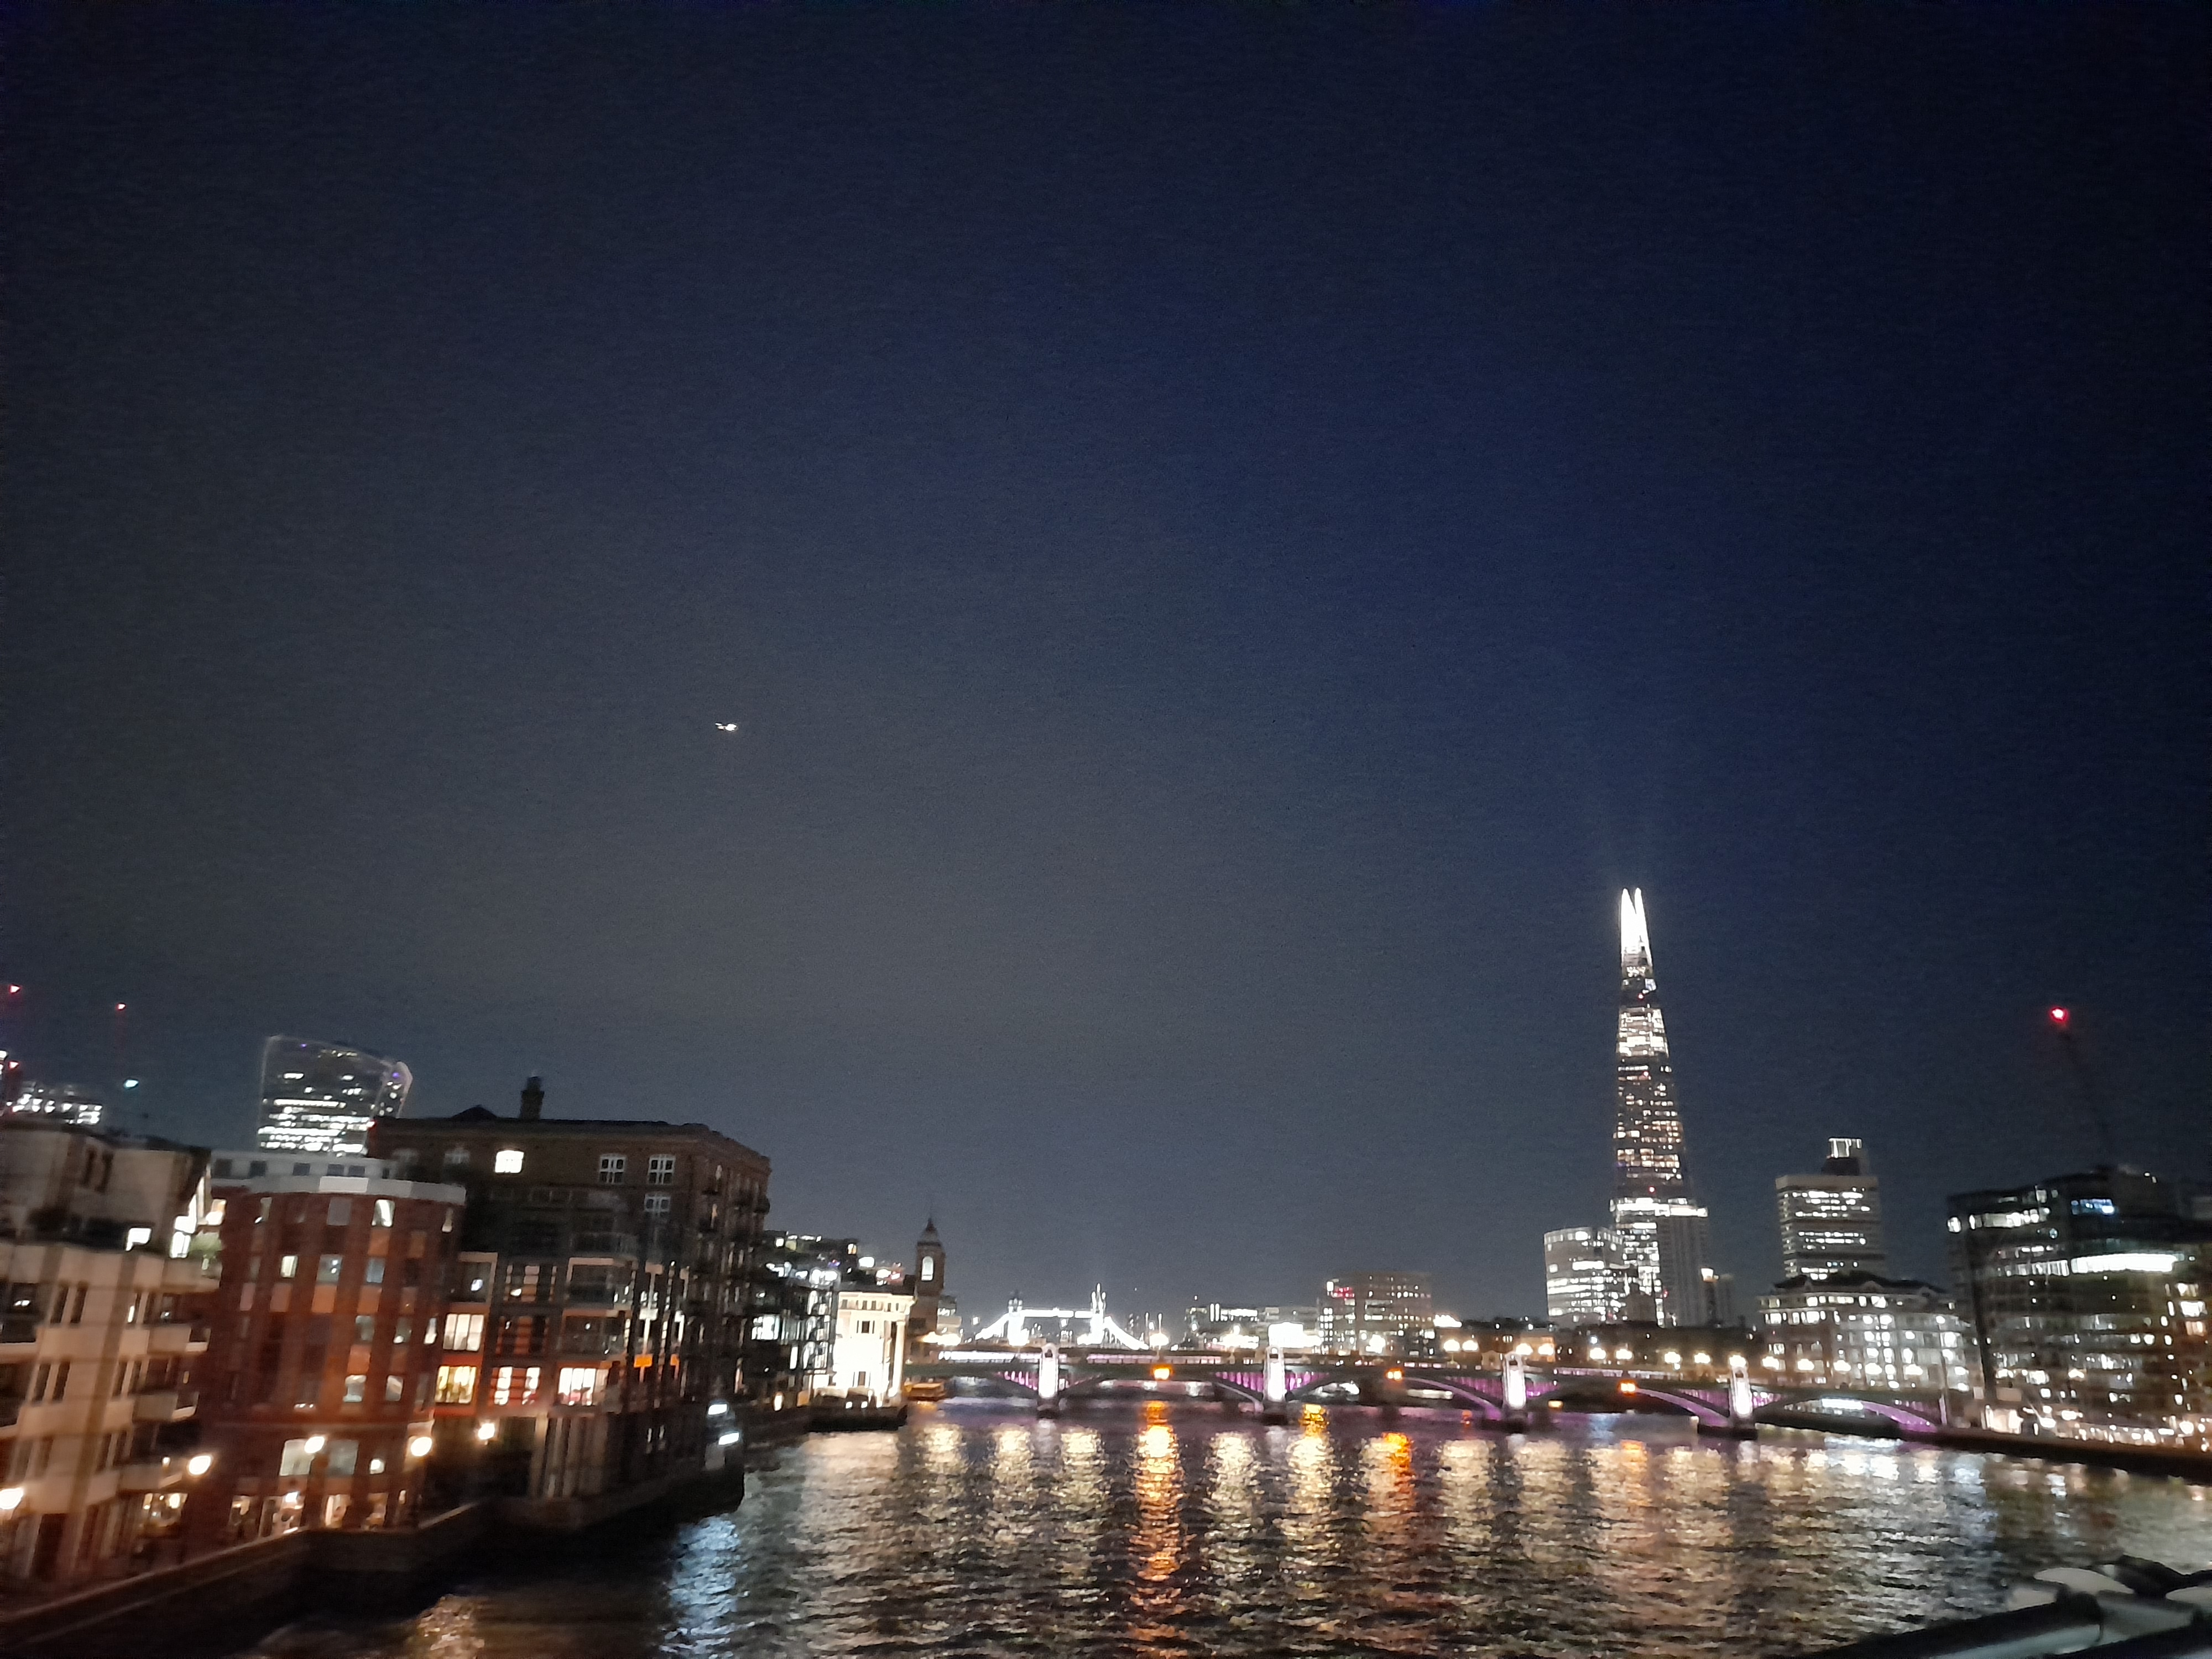 River Thames at night with the Shard showing on the background